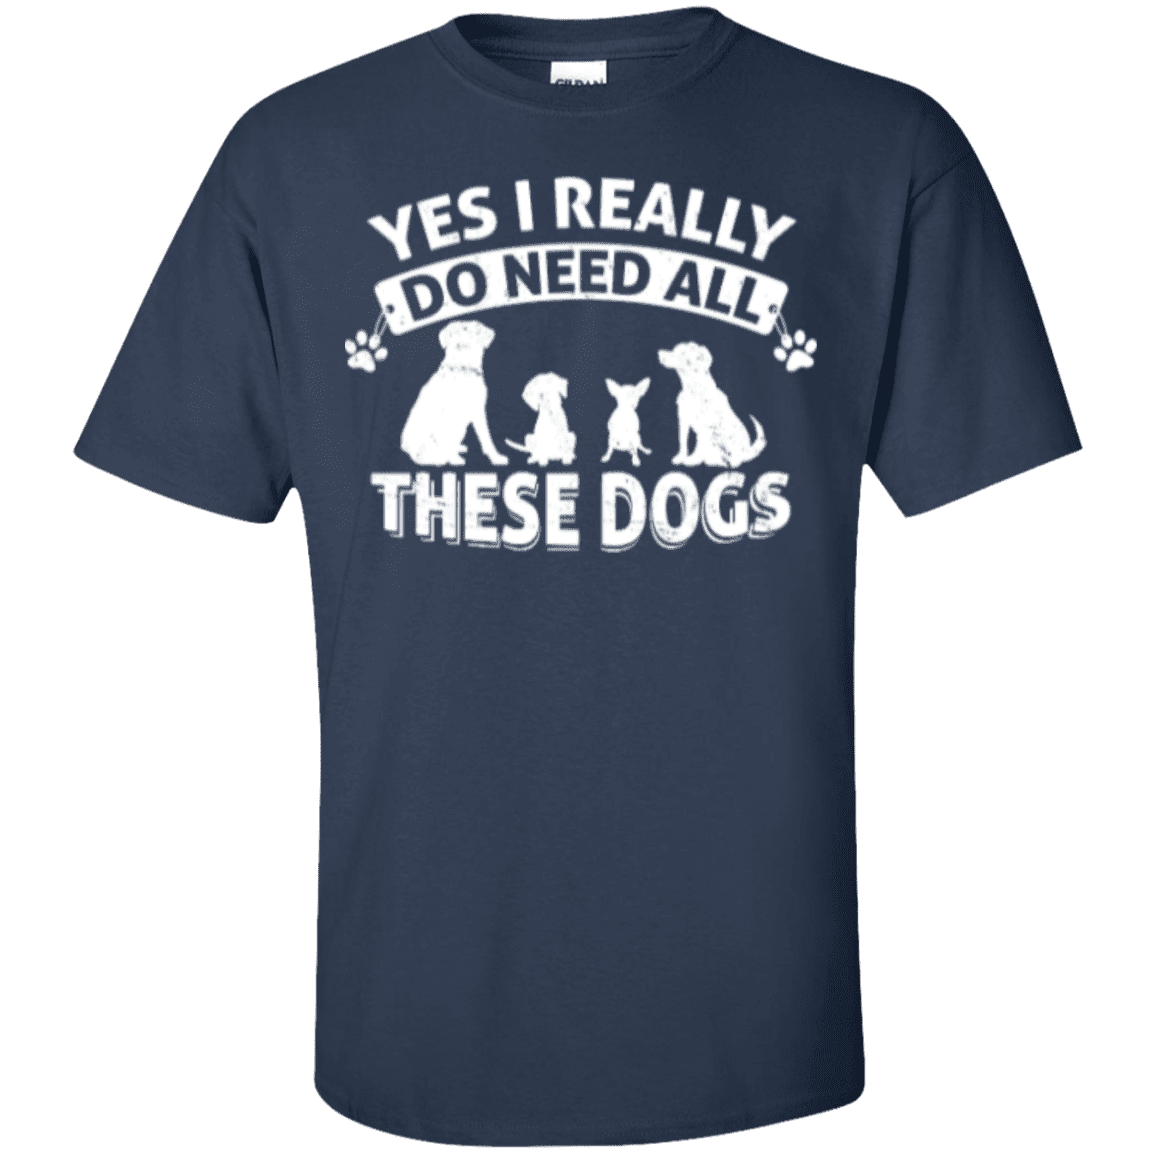 Yes I Need All These Dogs - T Shirt – Rescuers Club